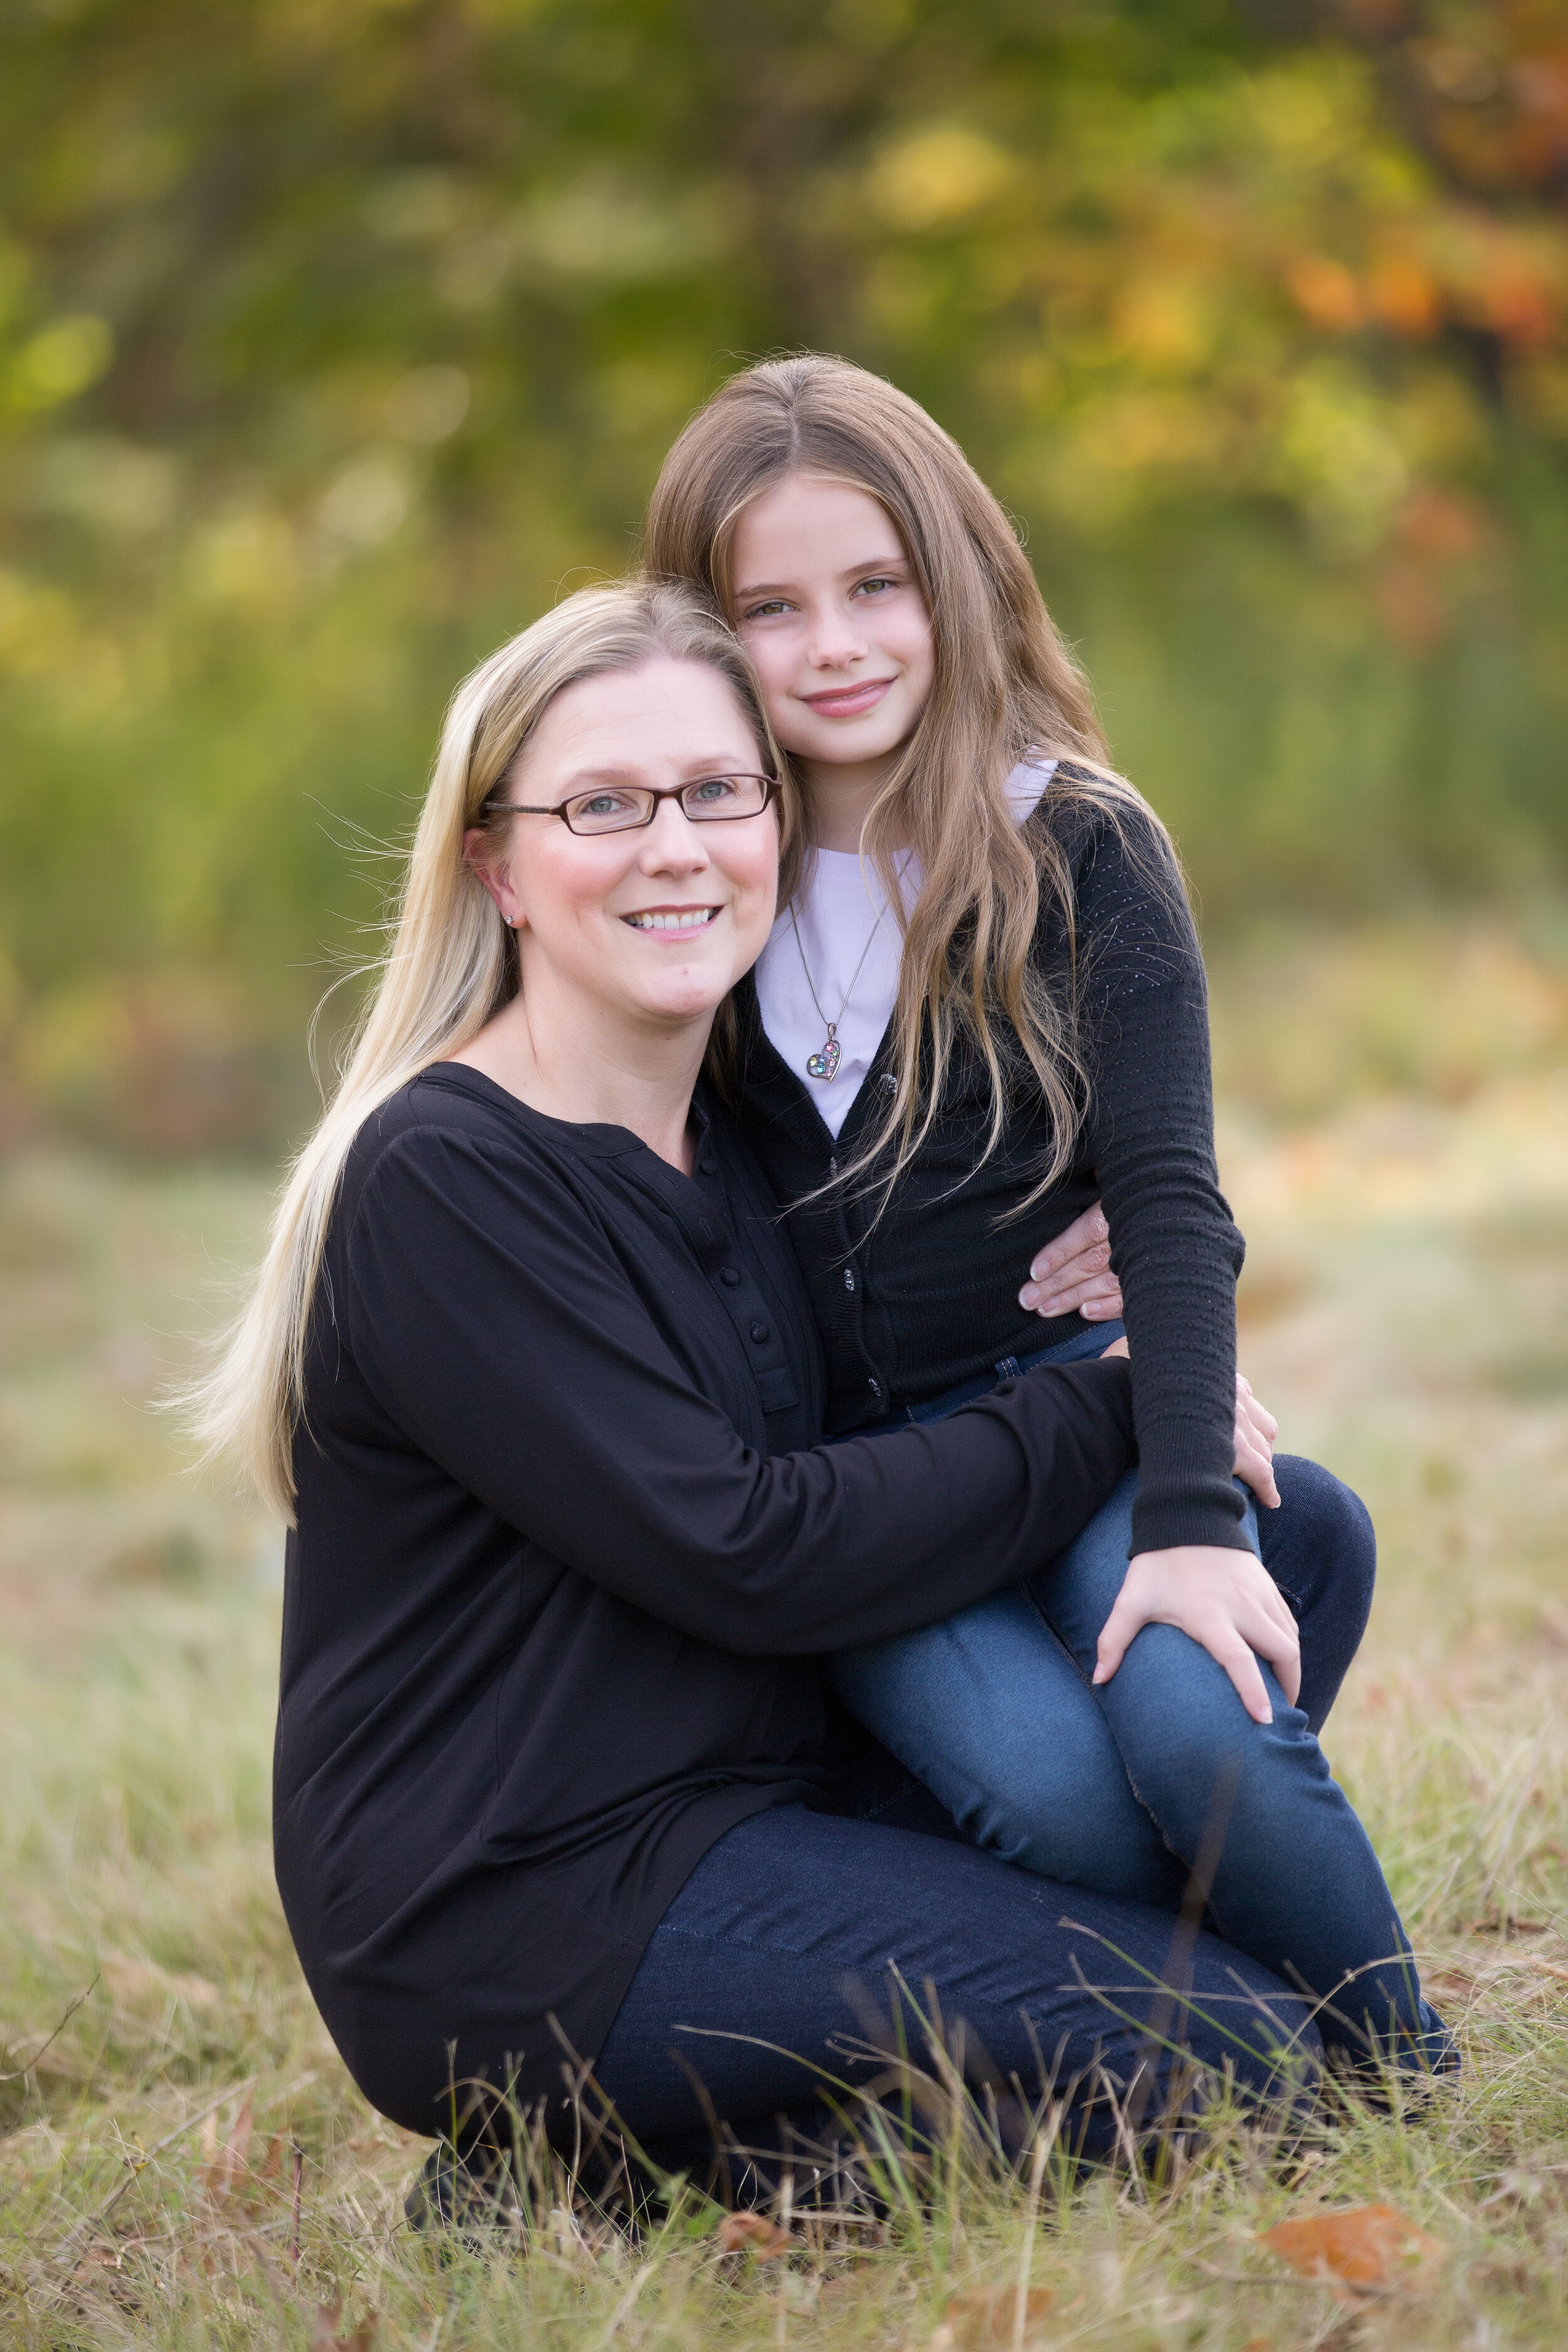 Best Mother Daughter Photoshoot Ideas and Tips